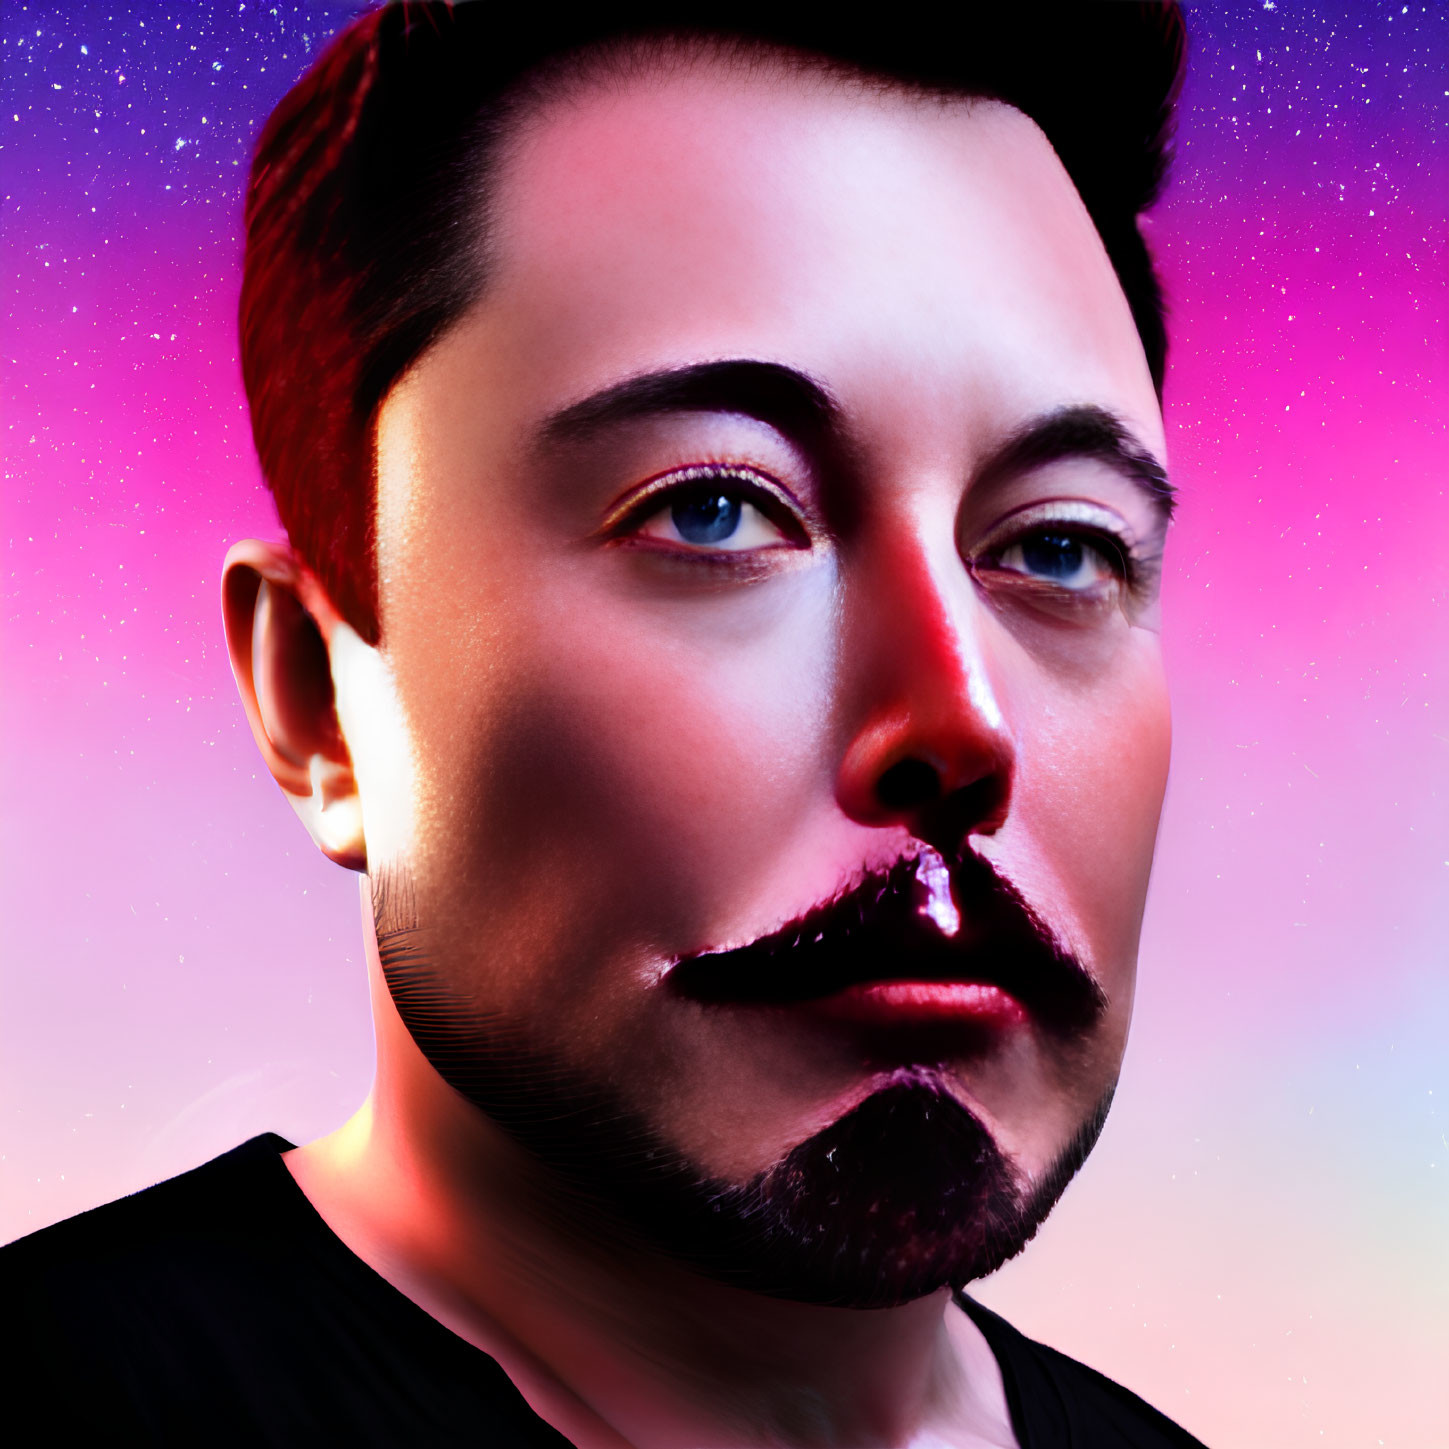 Prominent features portrait with groomed facial hair on colorful nebula background